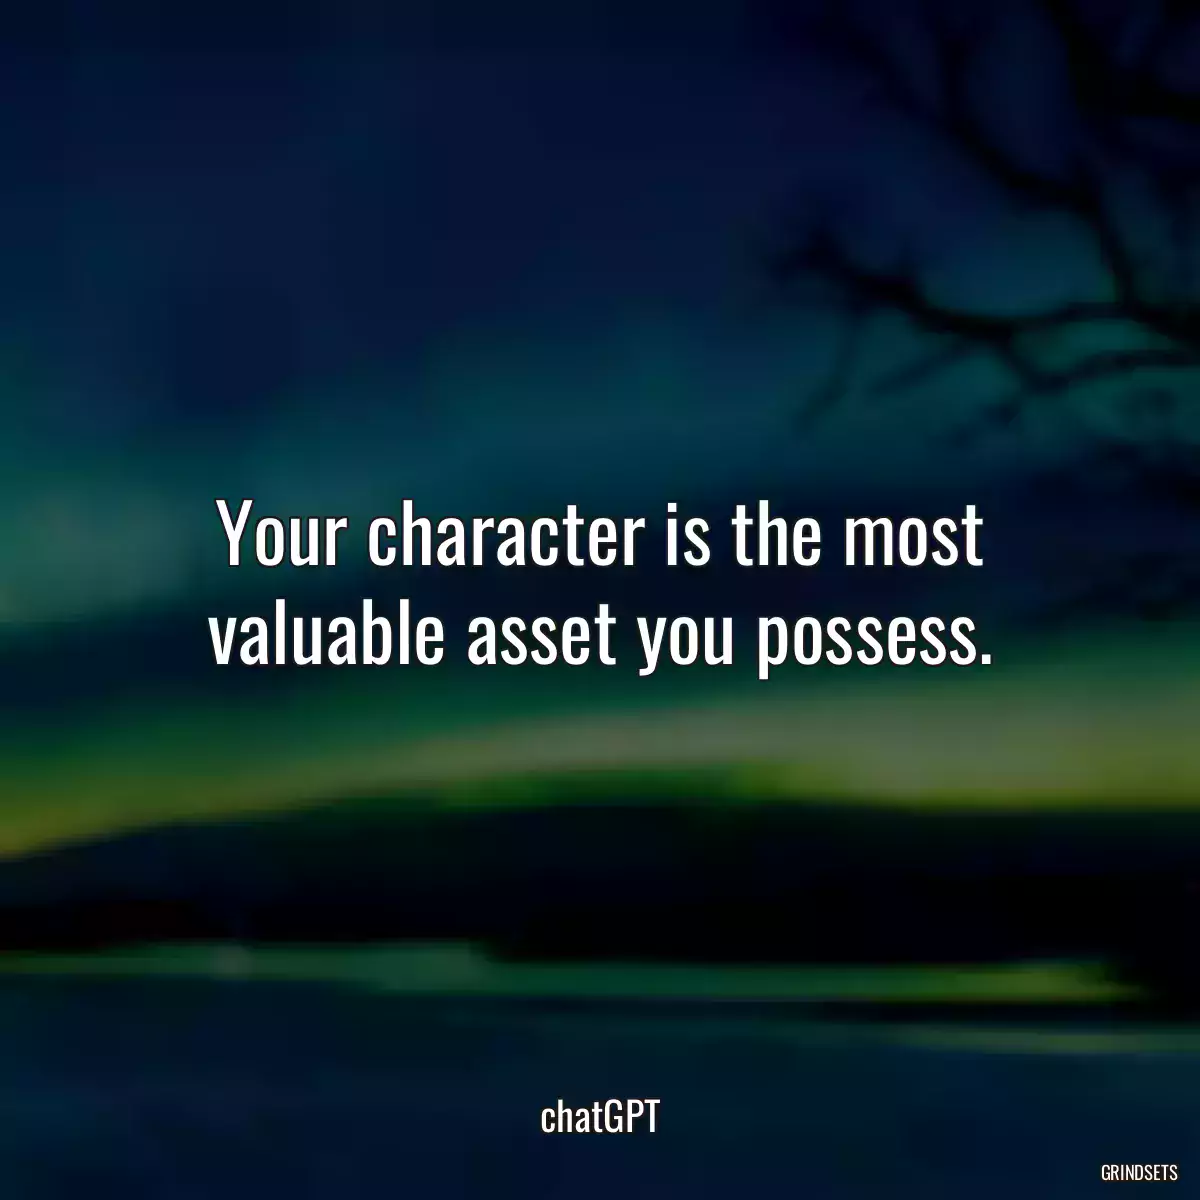 Your character is the most valuable asset you possess.